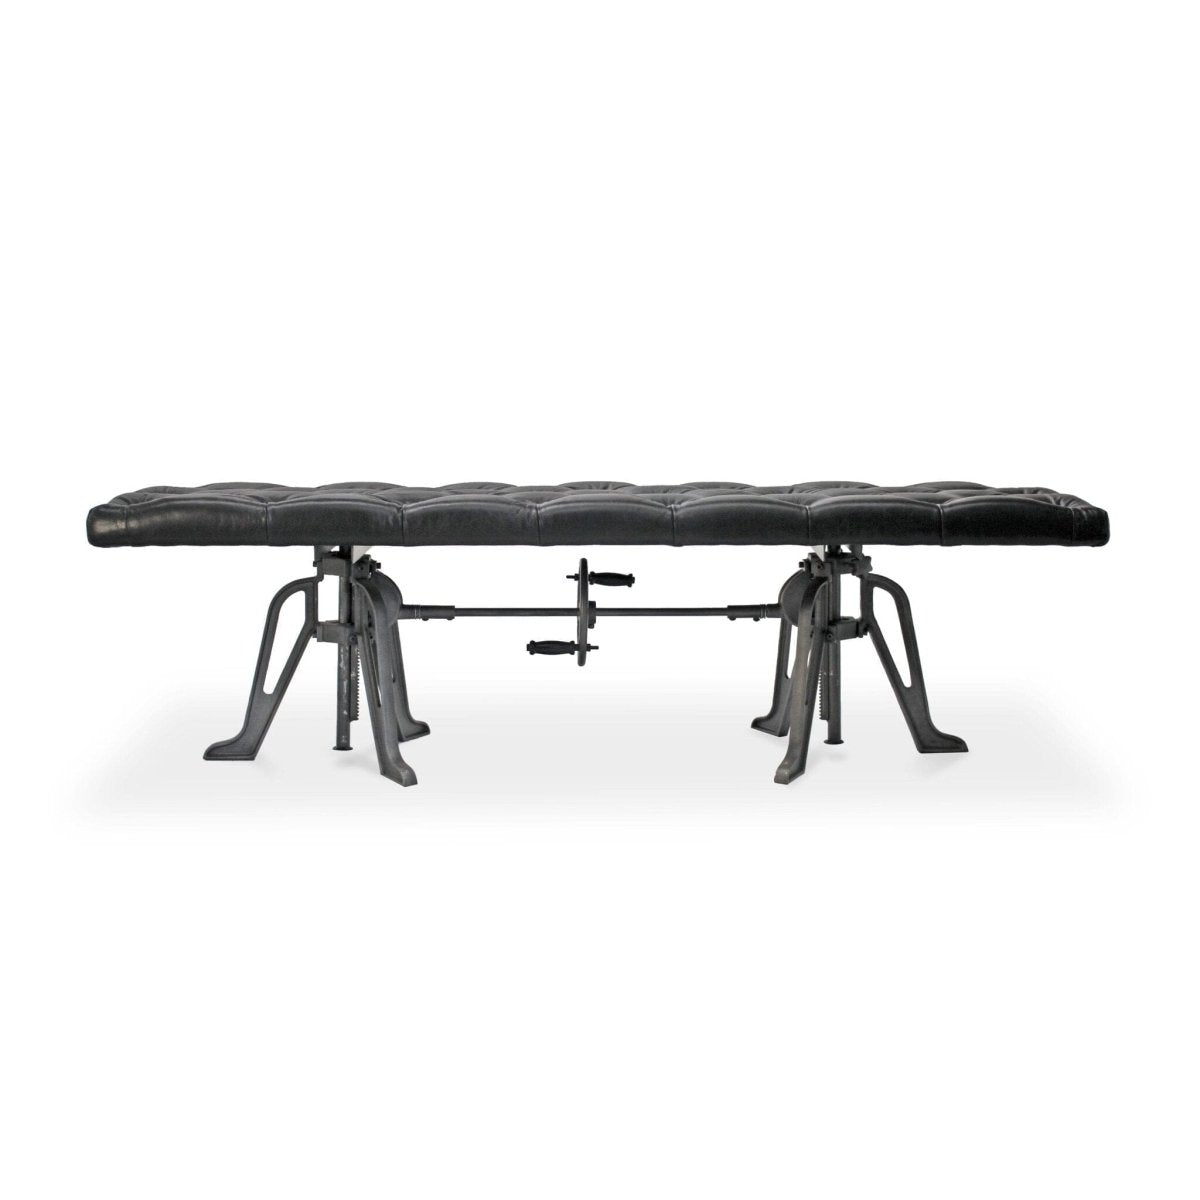 Adjustable Industrial Dining Bench - Cast Iron - Black Tufted Leather - 70